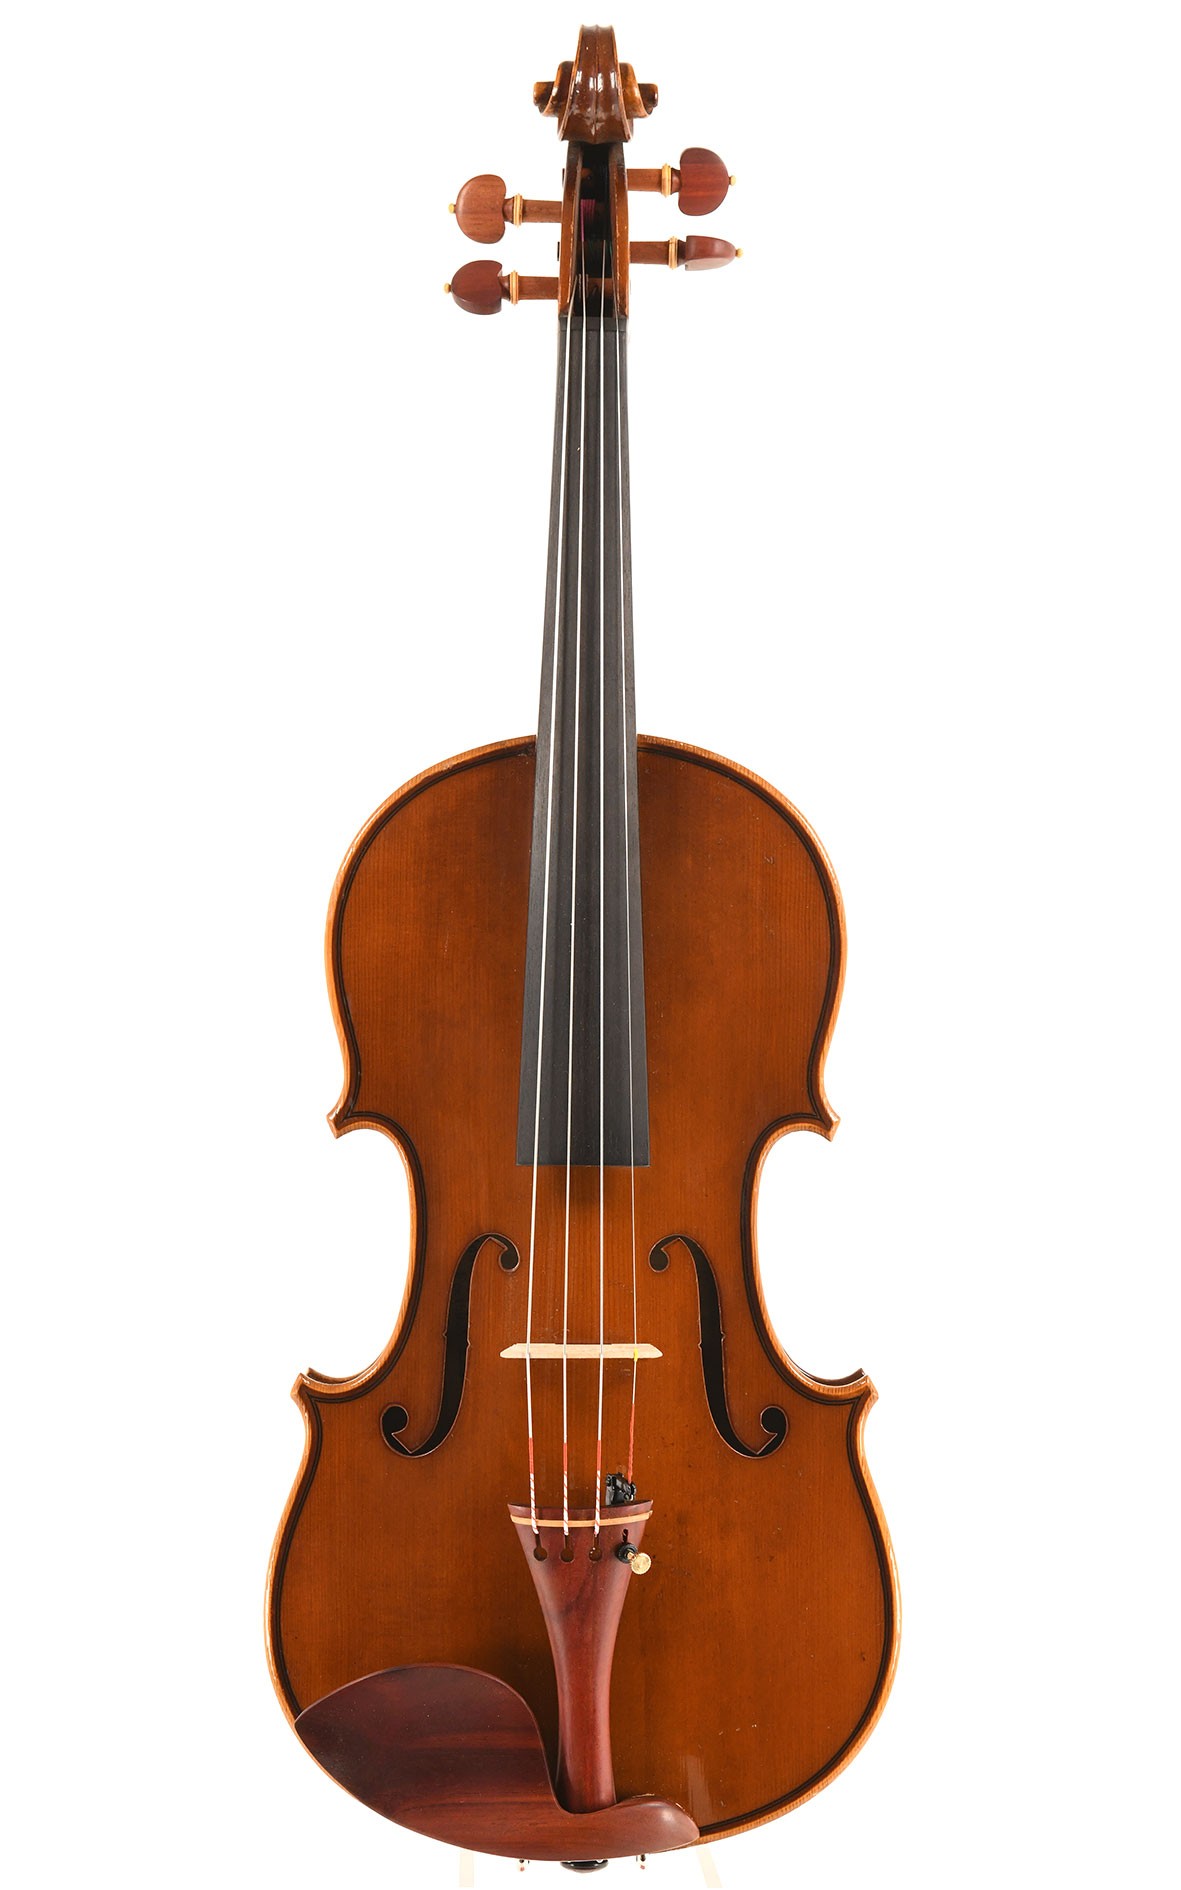 Exceptionally beautiful old German Stradivarius copy, approx. 1920